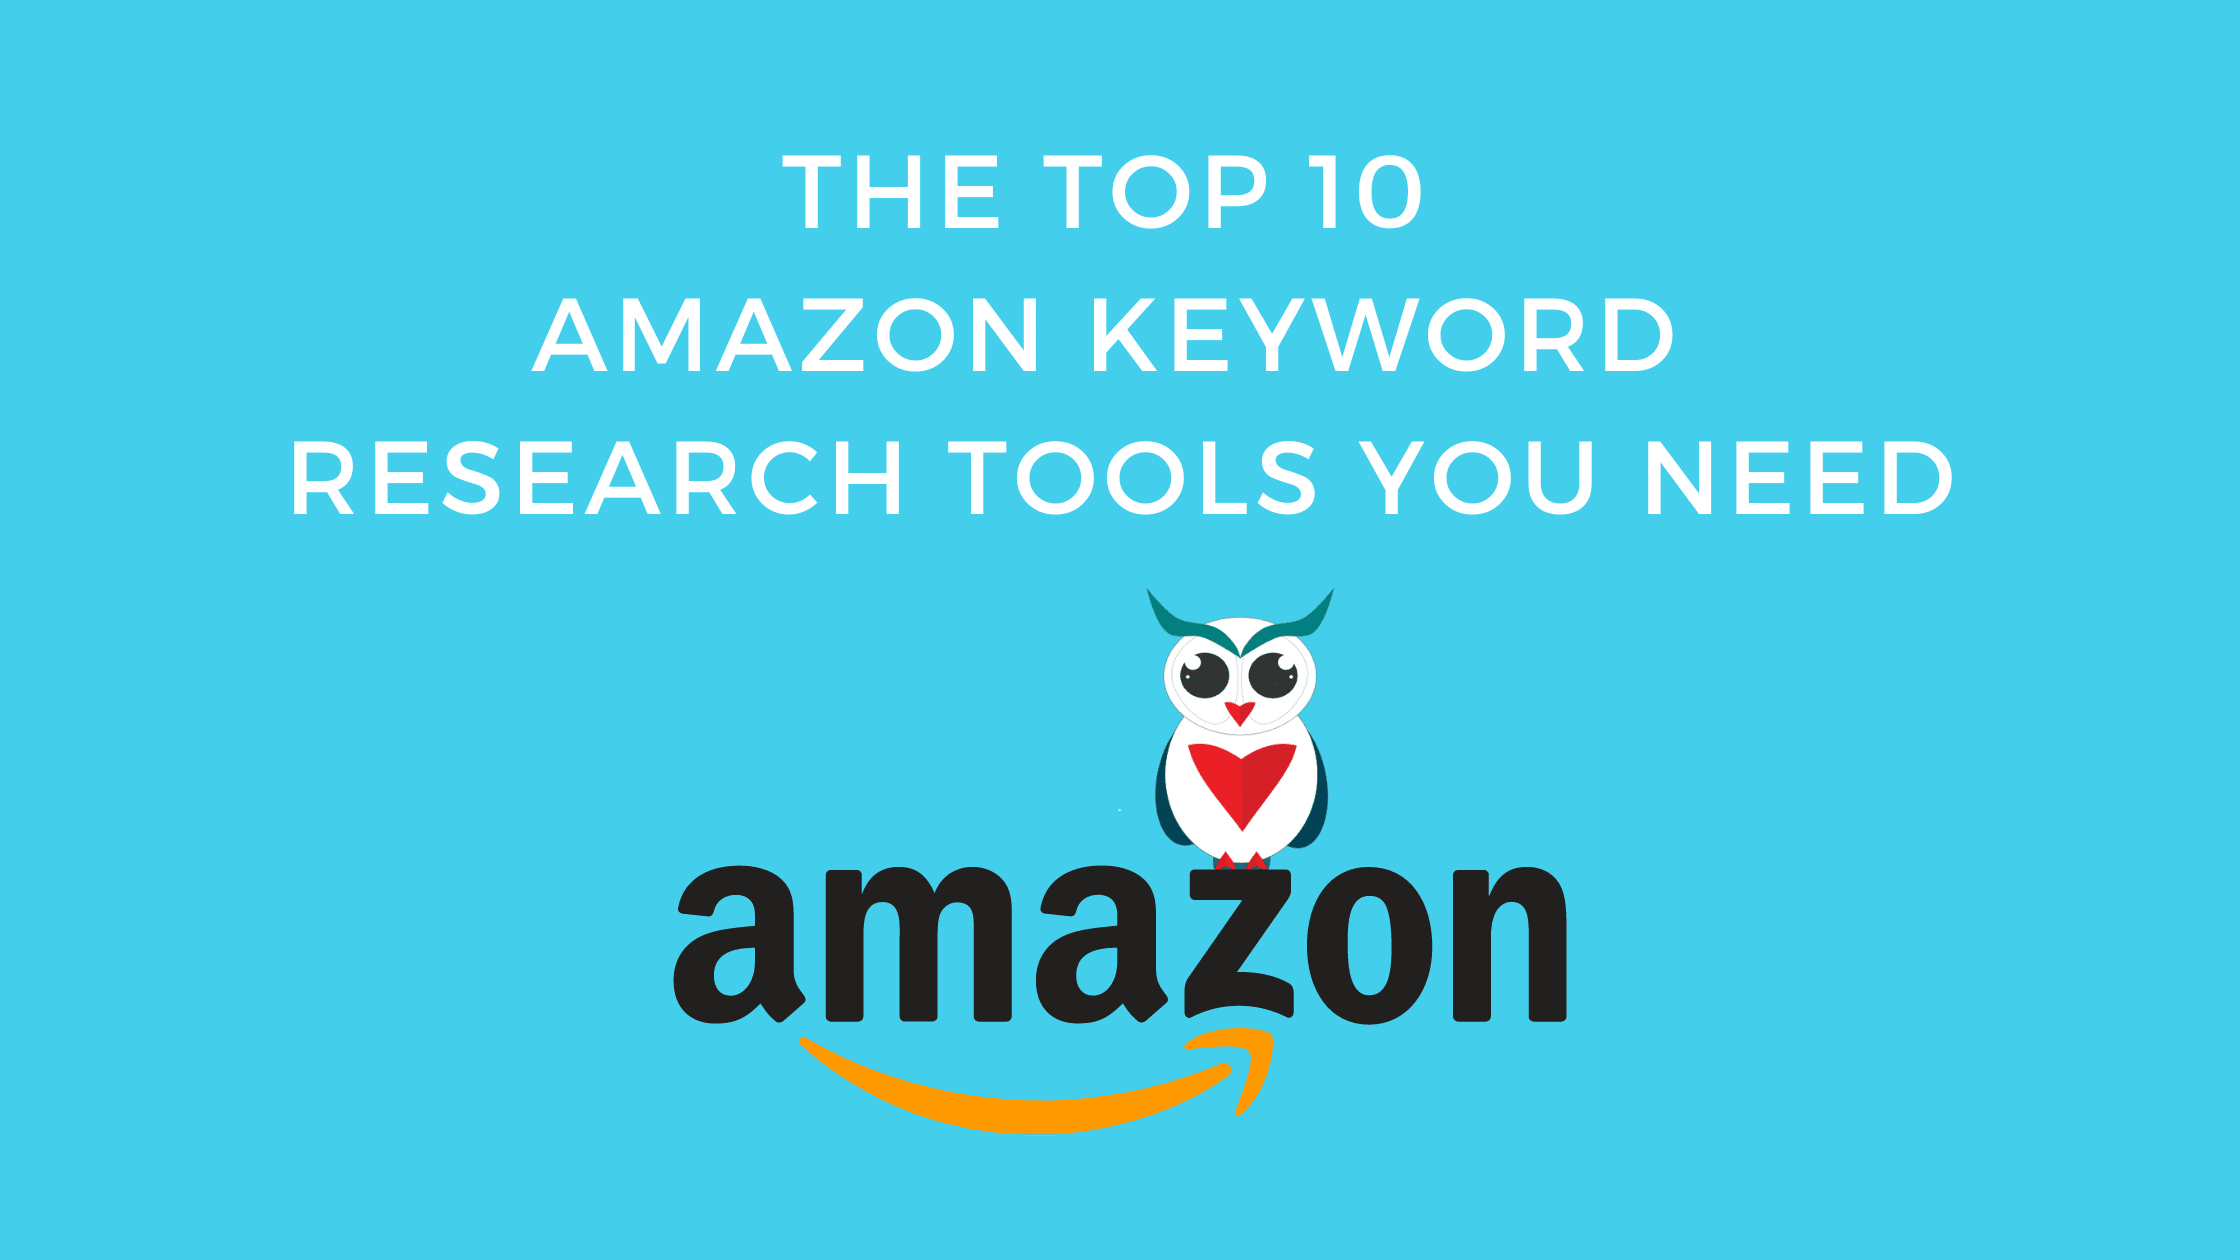 The Top 10 Amazon Keyword Research Tools You Need